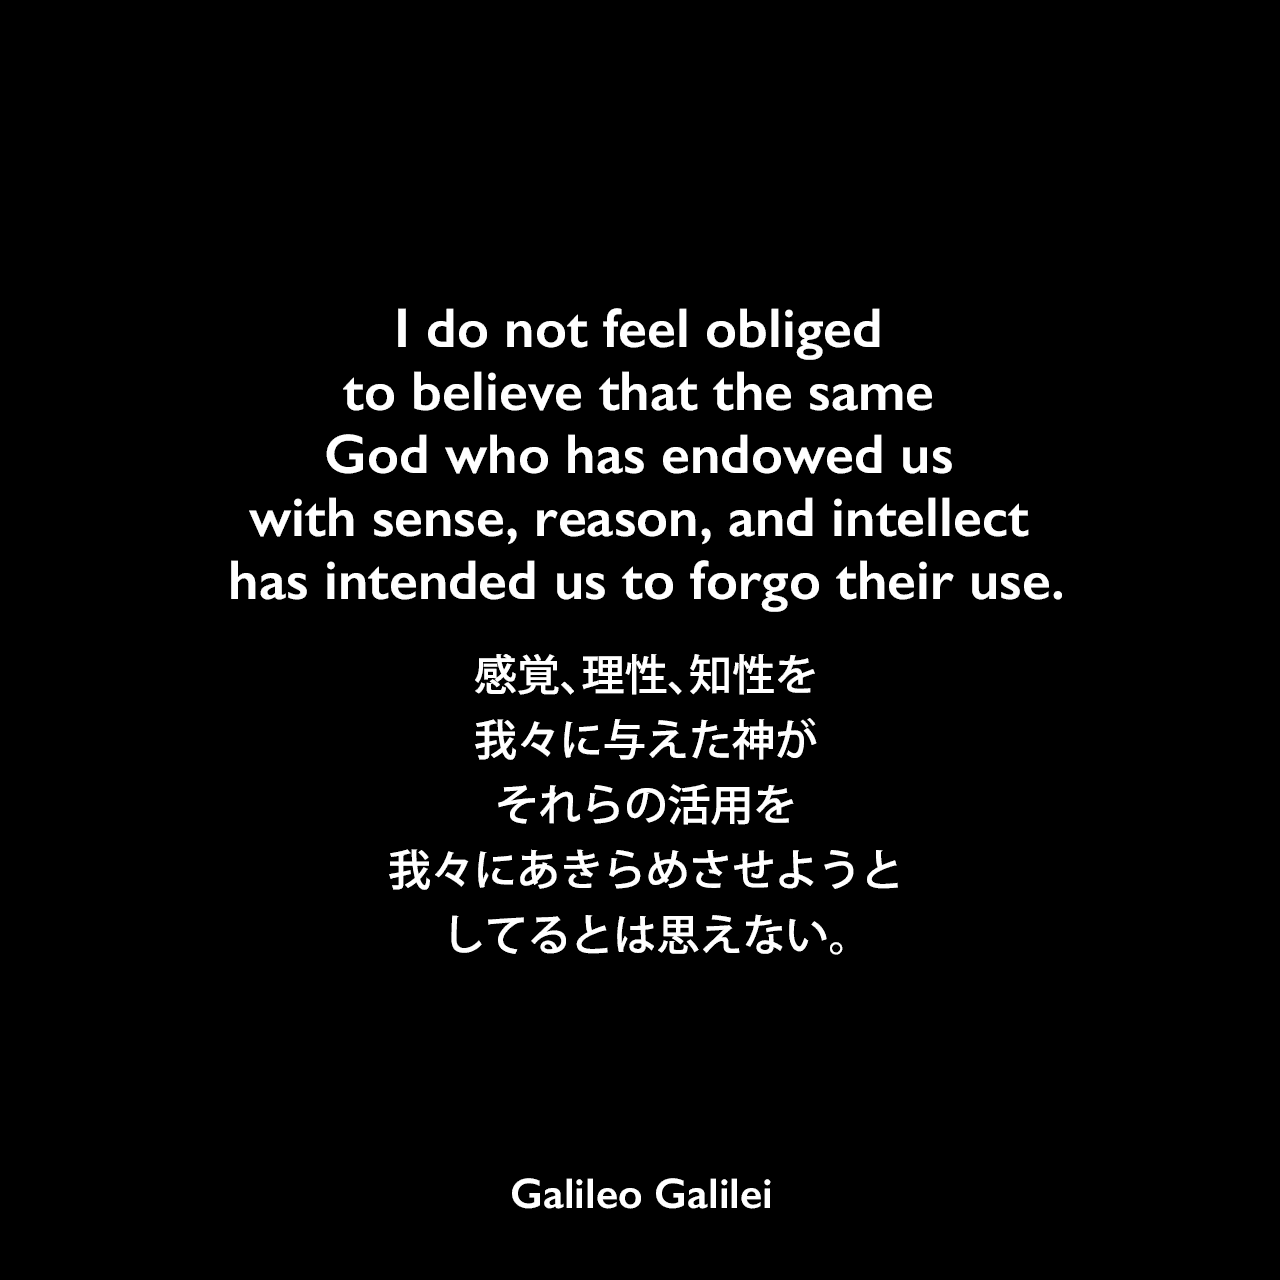 I do not feel obliged to believe that the same God who has endowed us with sense, reason, and intellect has intended us to forgo their use.感覚、理性、知性を我々に与えた神が、それらの活用を我々にあきらめさせようとしてるとは思えない。- ガリレオ・ガリレイの本「Letter to the Grand Duchess Christina」よりGalileo Galilei